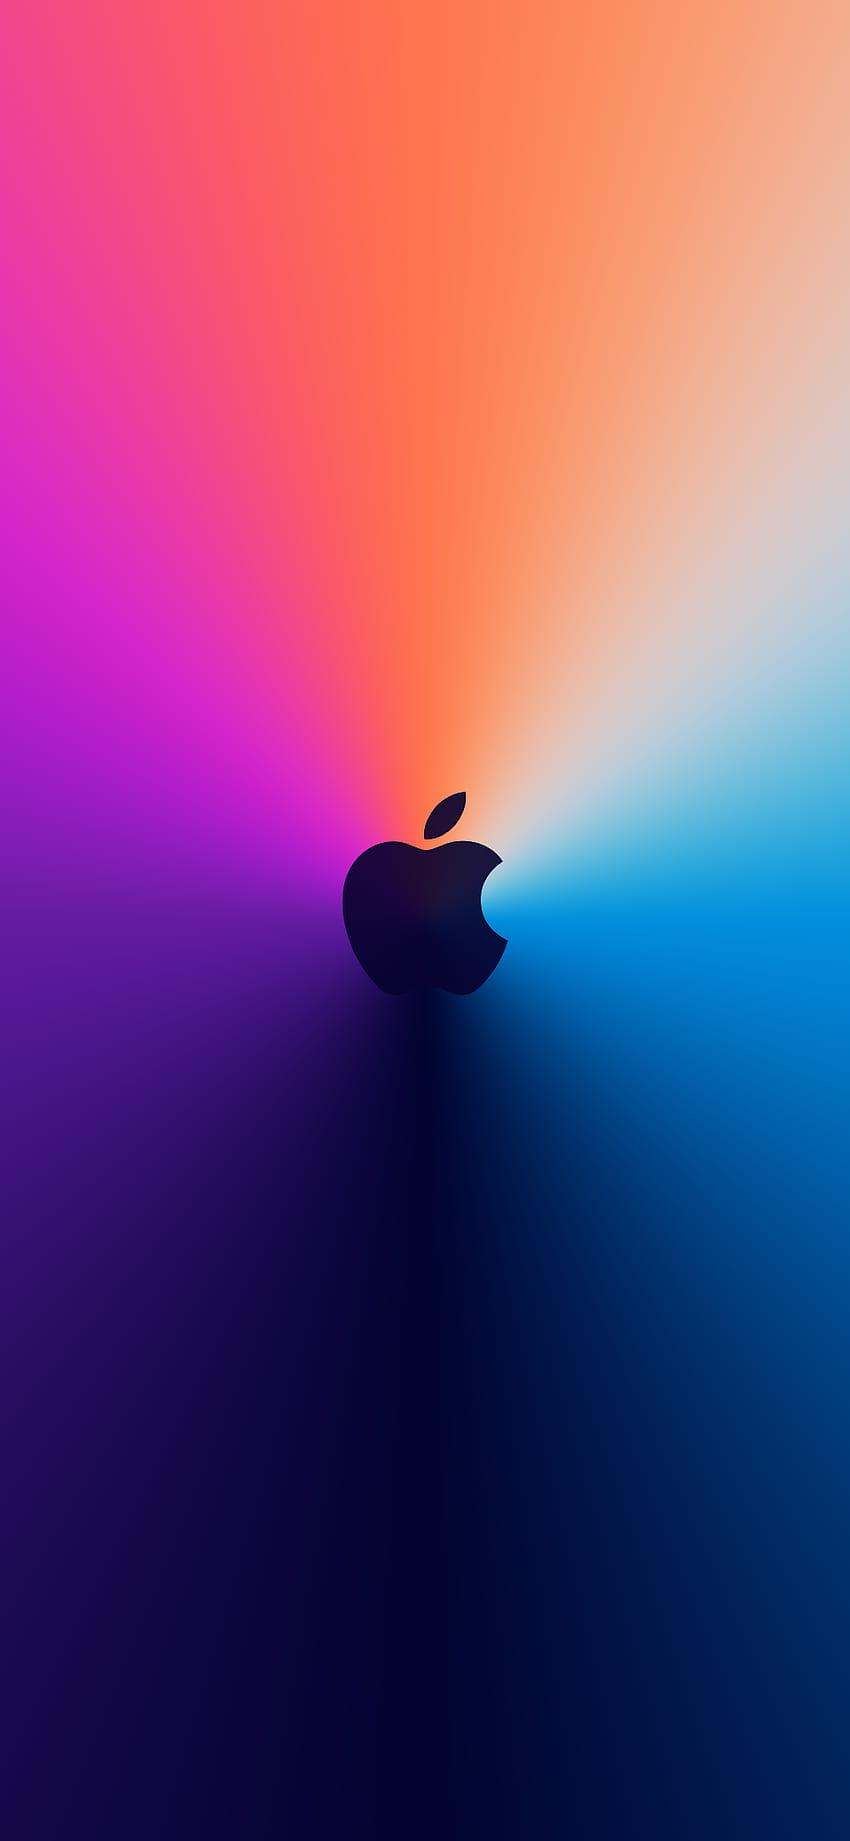 One more thing” event, 11 Apple Logo HD phone wallpaper